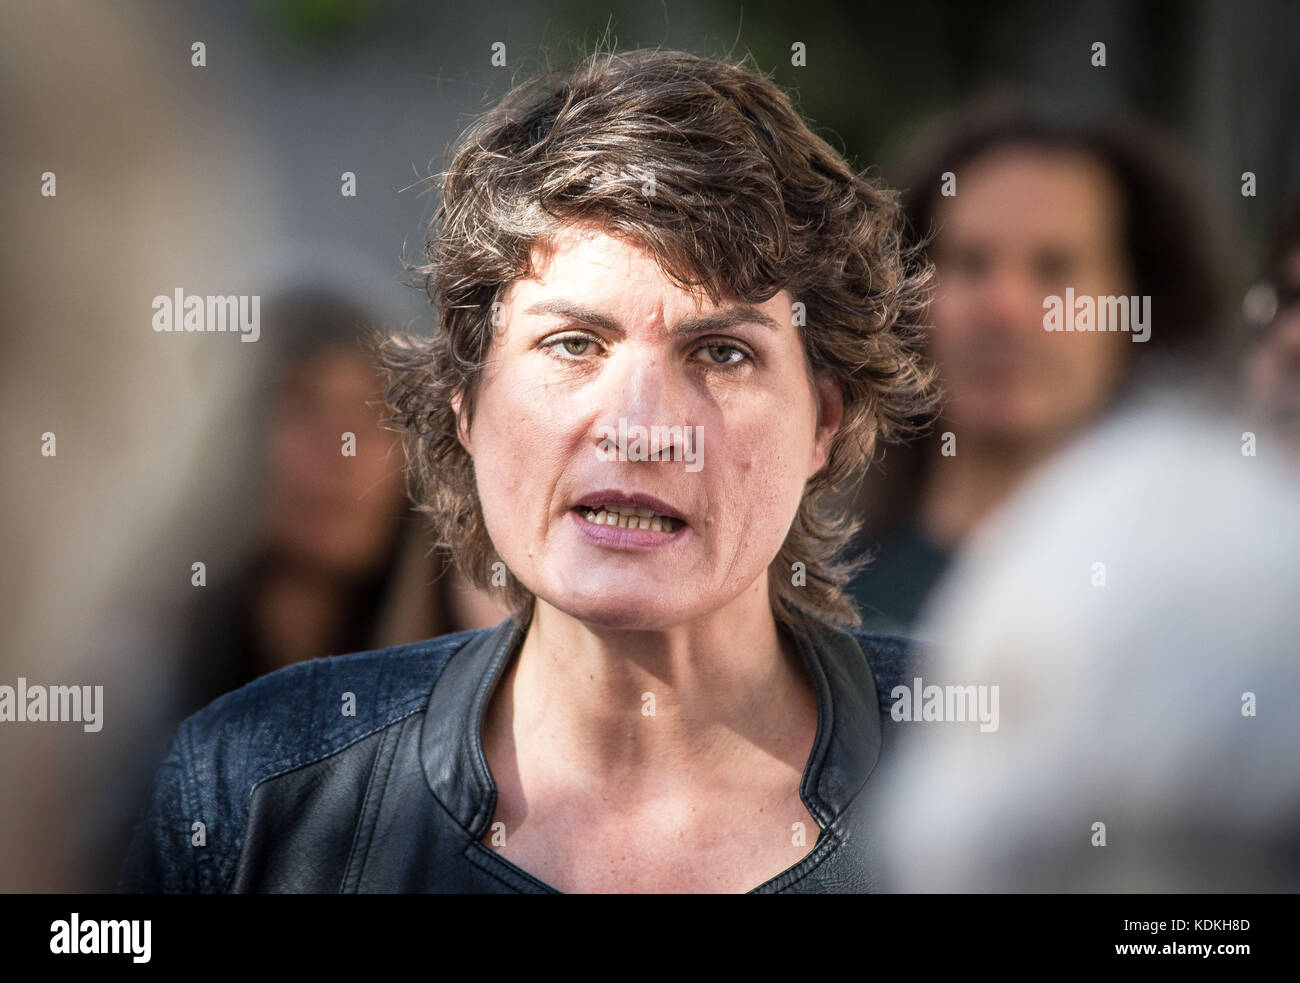 Munich, Bavaria, Germany. 14th Oct, 2017. Claudia Stamm of the Bavarian Parliament. Despite lengthy battles, the so-called Stolpersteine ('Stumbling Blocks'') containing the names & information of victims of National Socialism were installed at four different sites in Munich. The City of Munich forbid the installation of the memorial stones on public ground in 2015, which led the Stolpersteine Initiative (''˜Stumbling Block Initiative'') to seek private properties to install them. To date, 61,000 Stolpersteine in 2,000 cities in 21 countries have been dedicated, with much criticism l Stock Photo